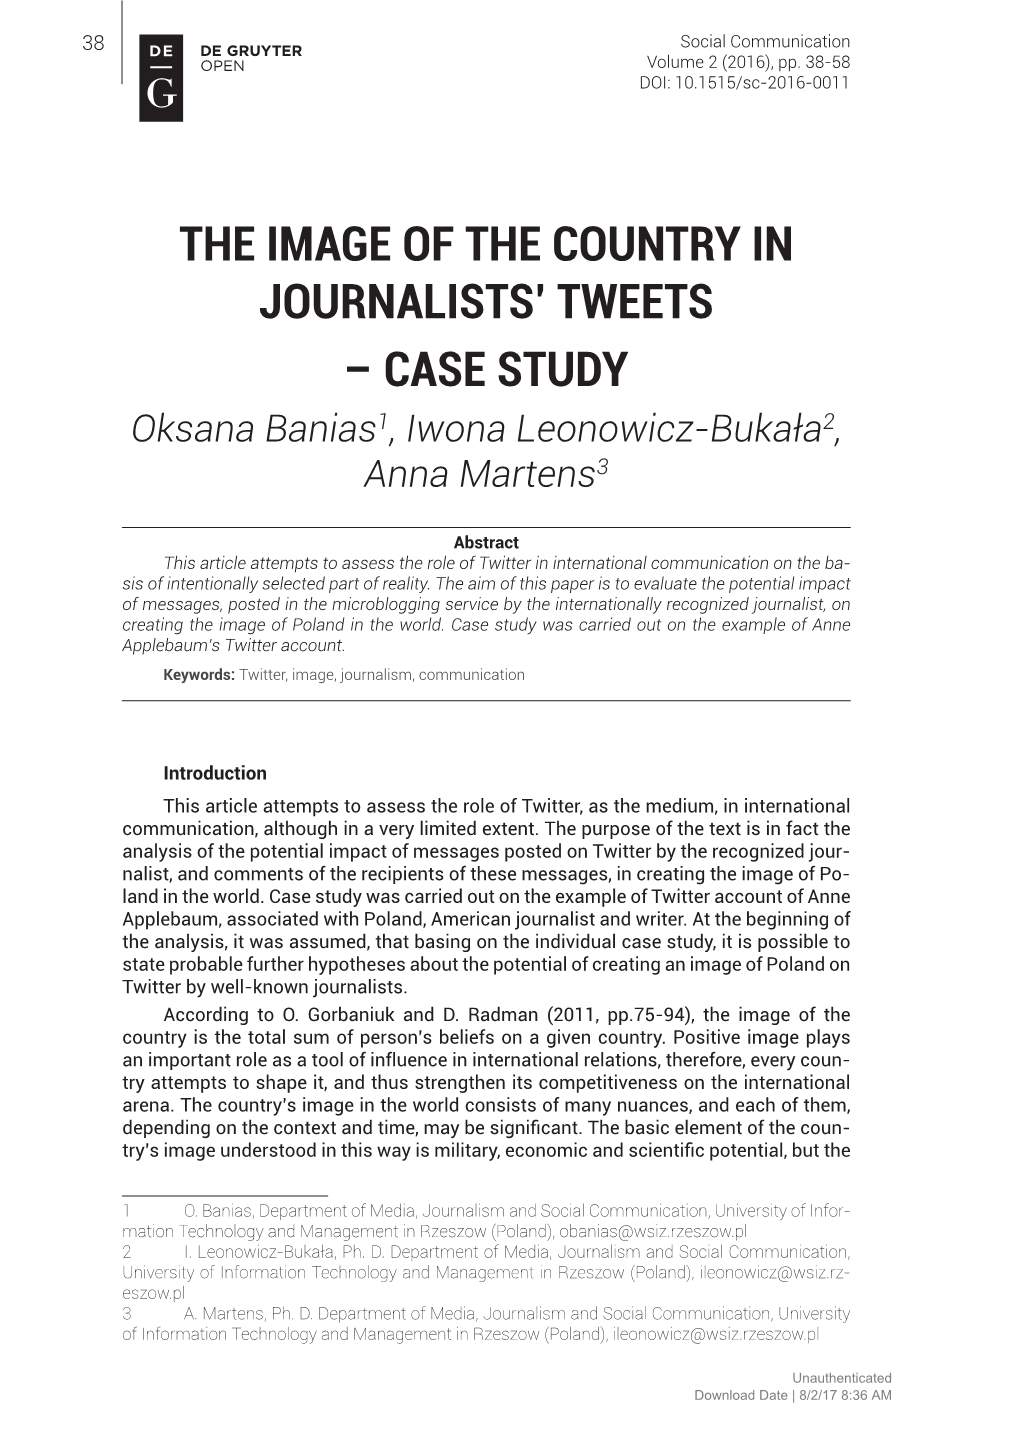 The Image of the Country in Journalists' Tweets – Case Study